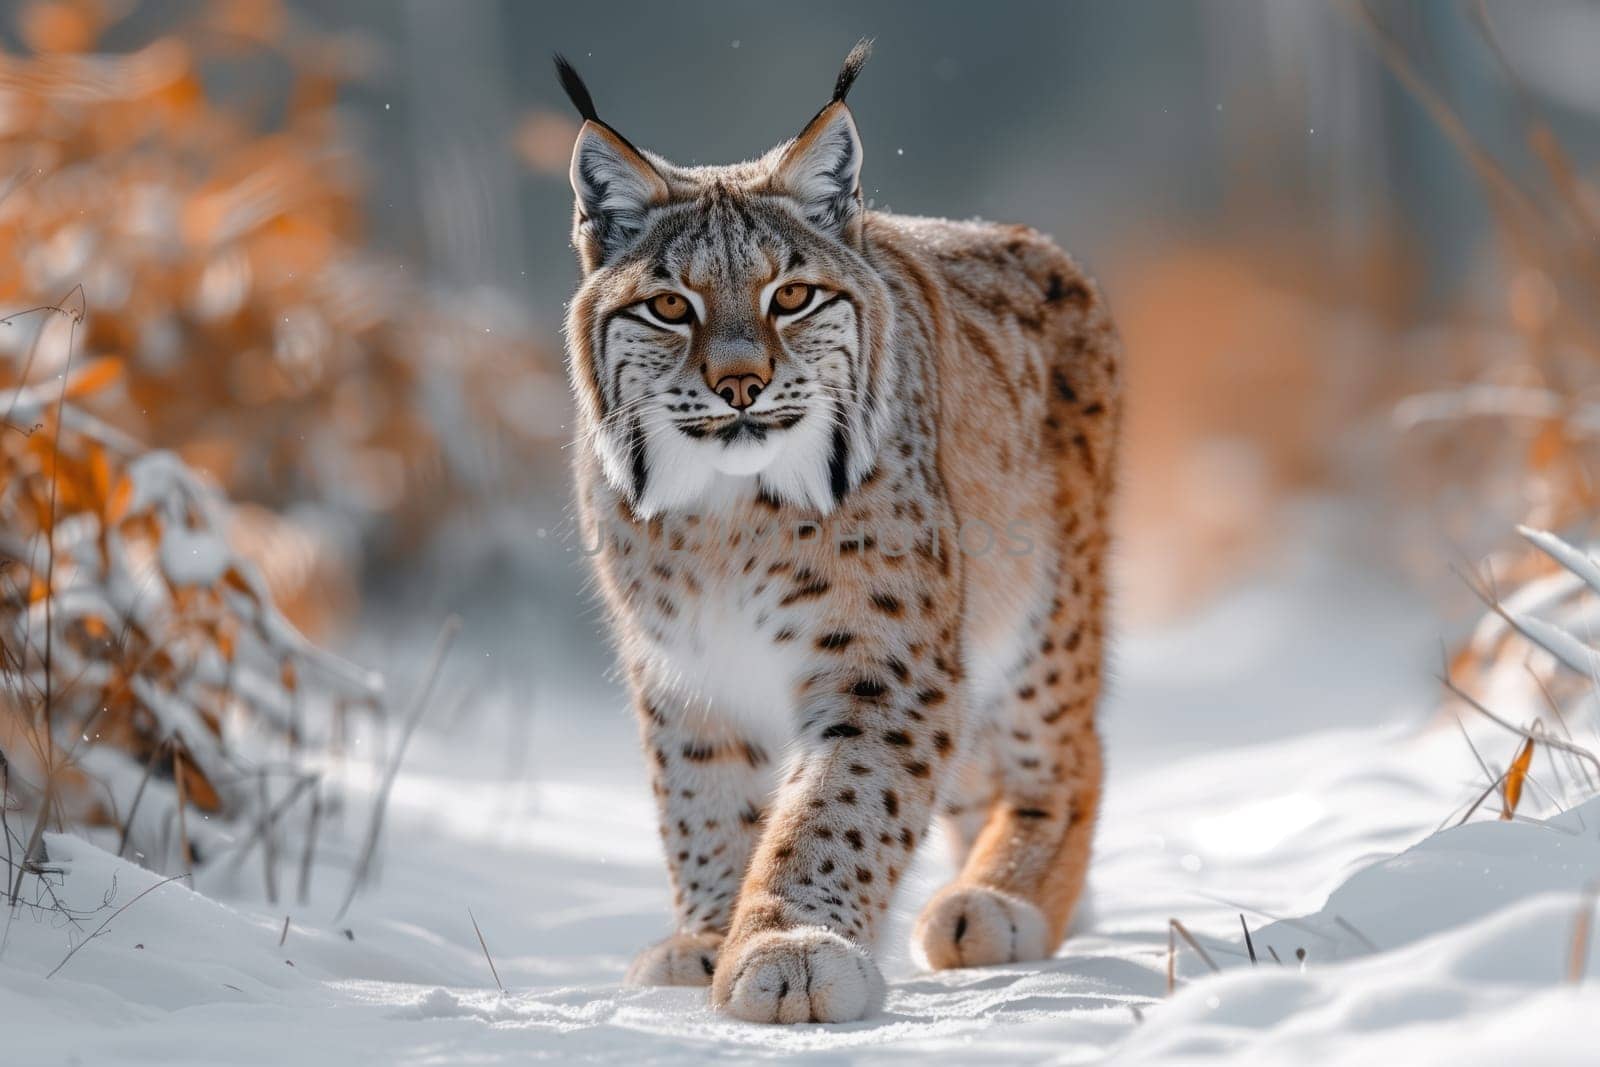 A Carnivore Felidae Lynx with Whiskers walking in Snowcovered woods in Winter by richwolf